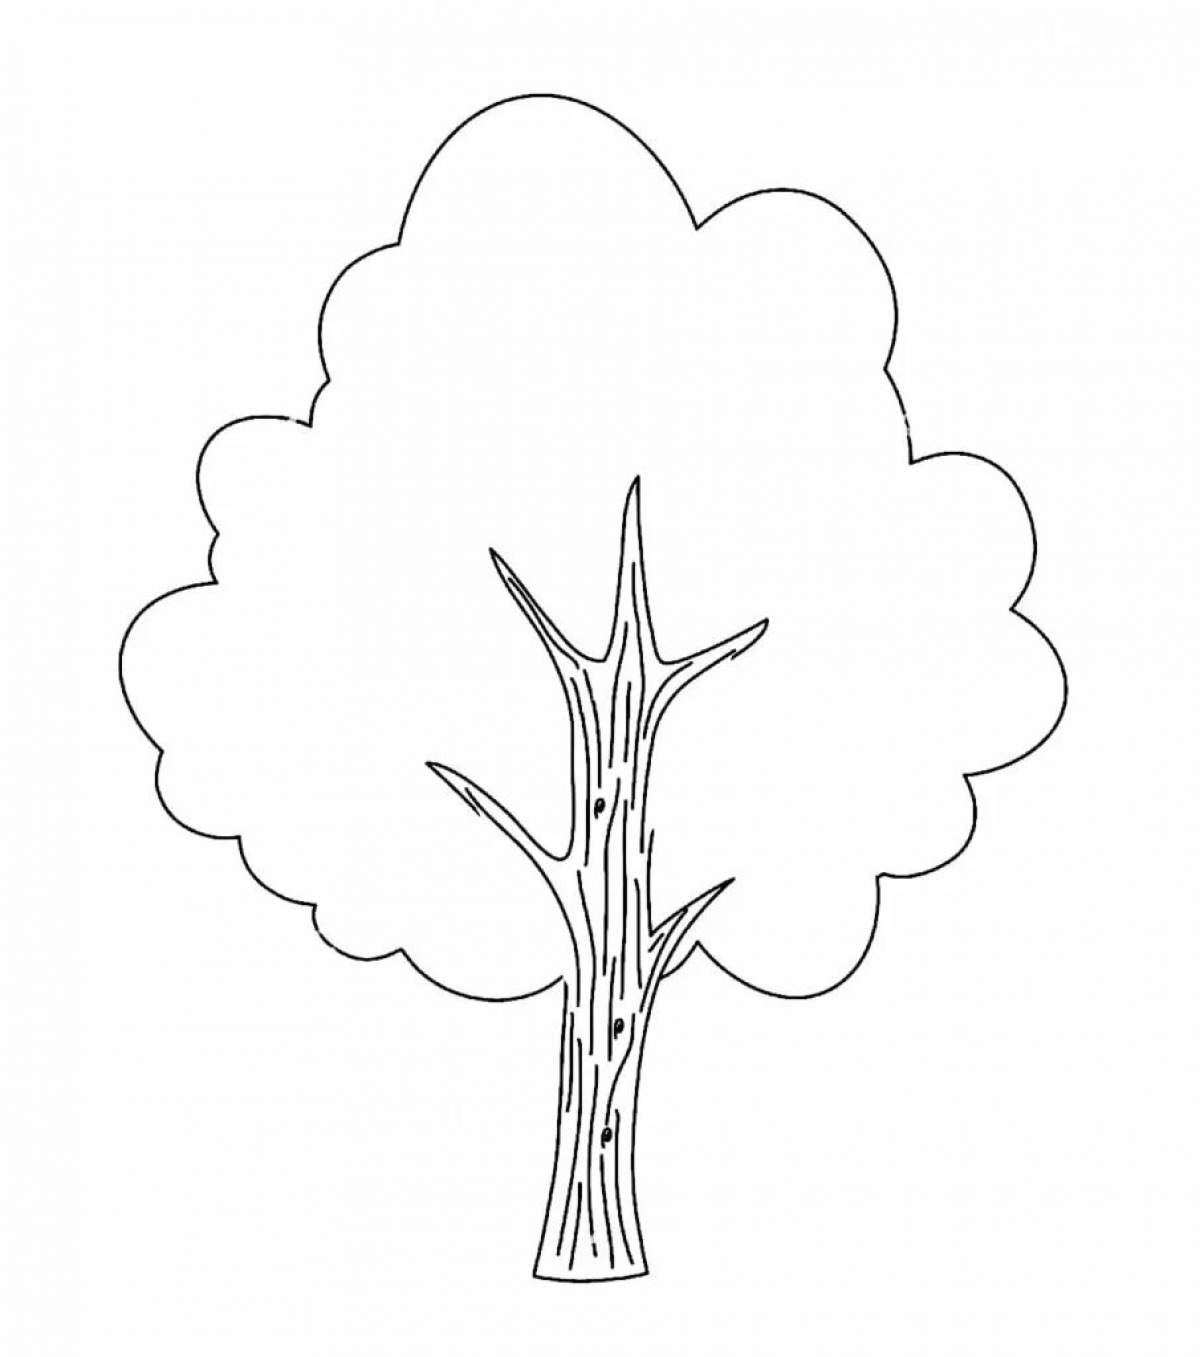 Living tree coloring for children 6-7 years old